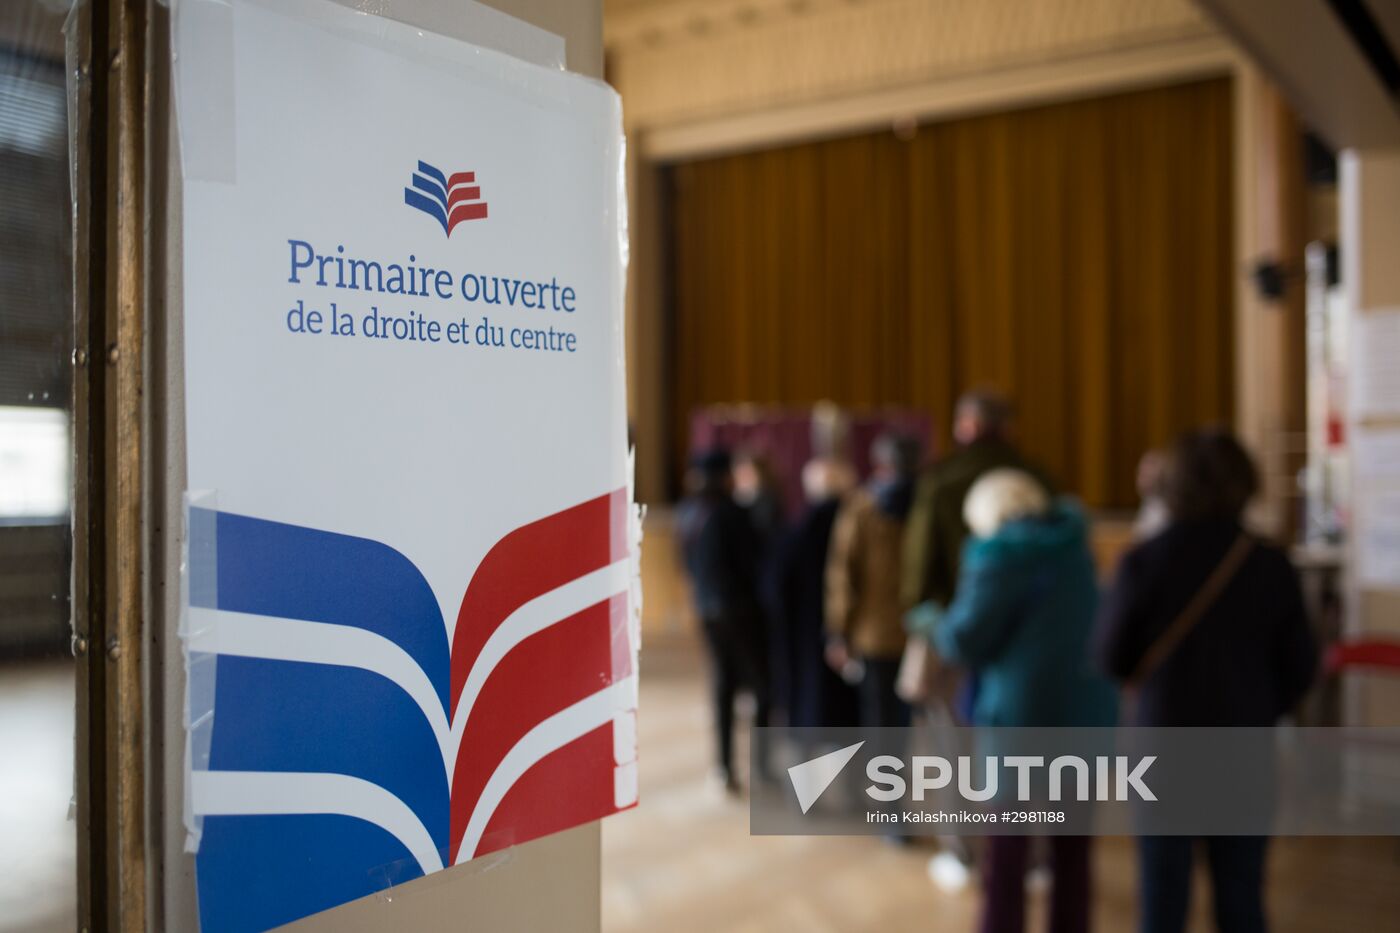 France's Republican party holds 2nd round run-off for presidential candidate